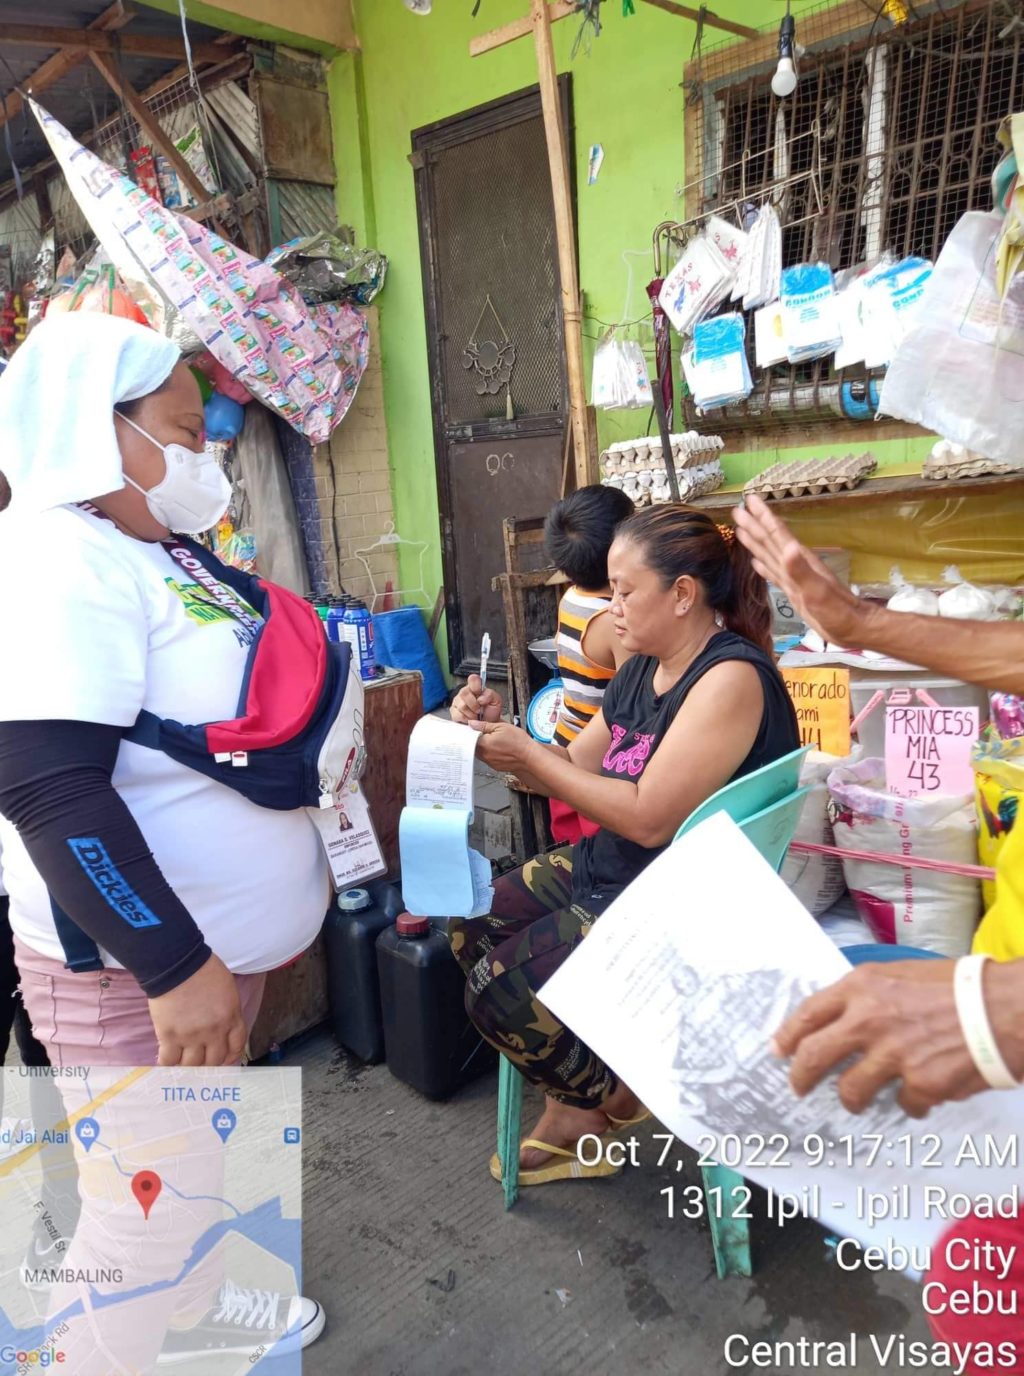 CESET apprehends violators, conducts cleanup drive in Mambaling